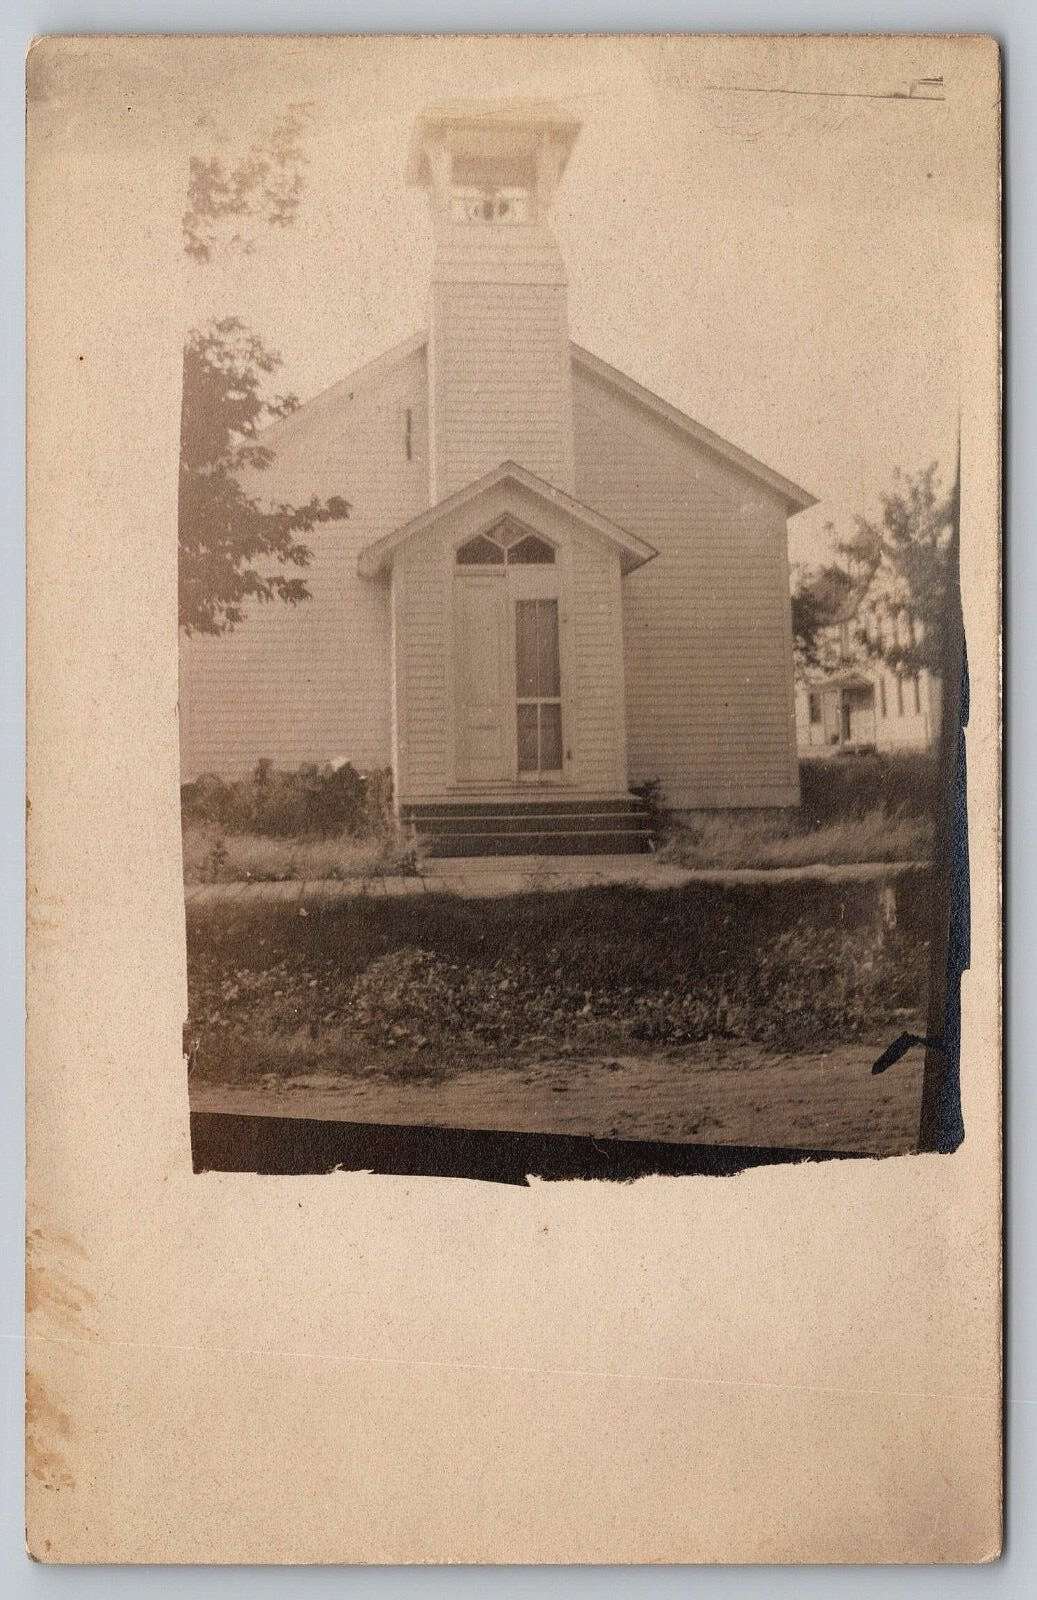 Postcard RPPC Real Photograph Of A School House Or Church Building Unposted